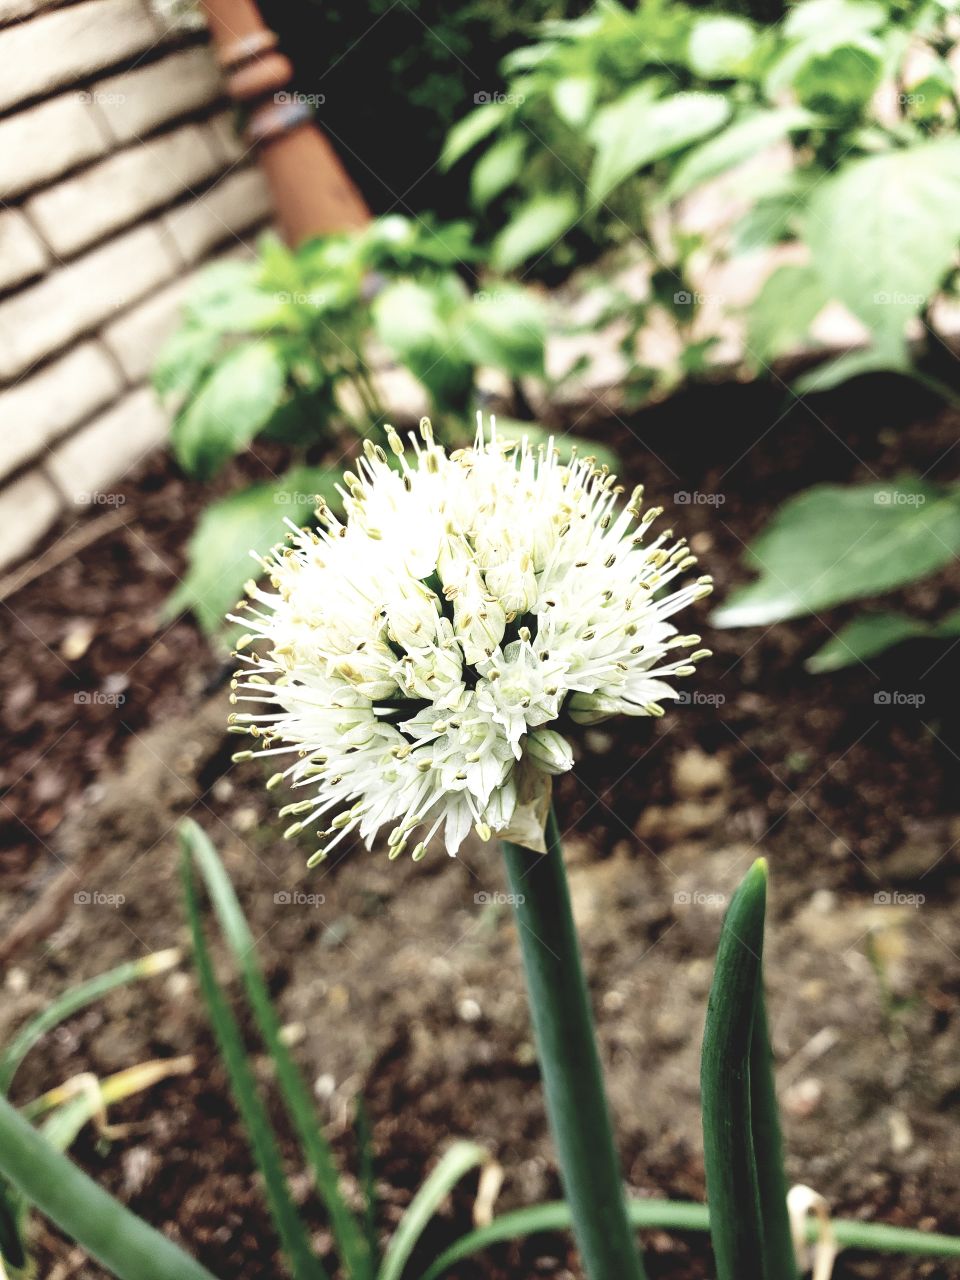 How amazing that this lovely bloom sits atop a simple onion plant.